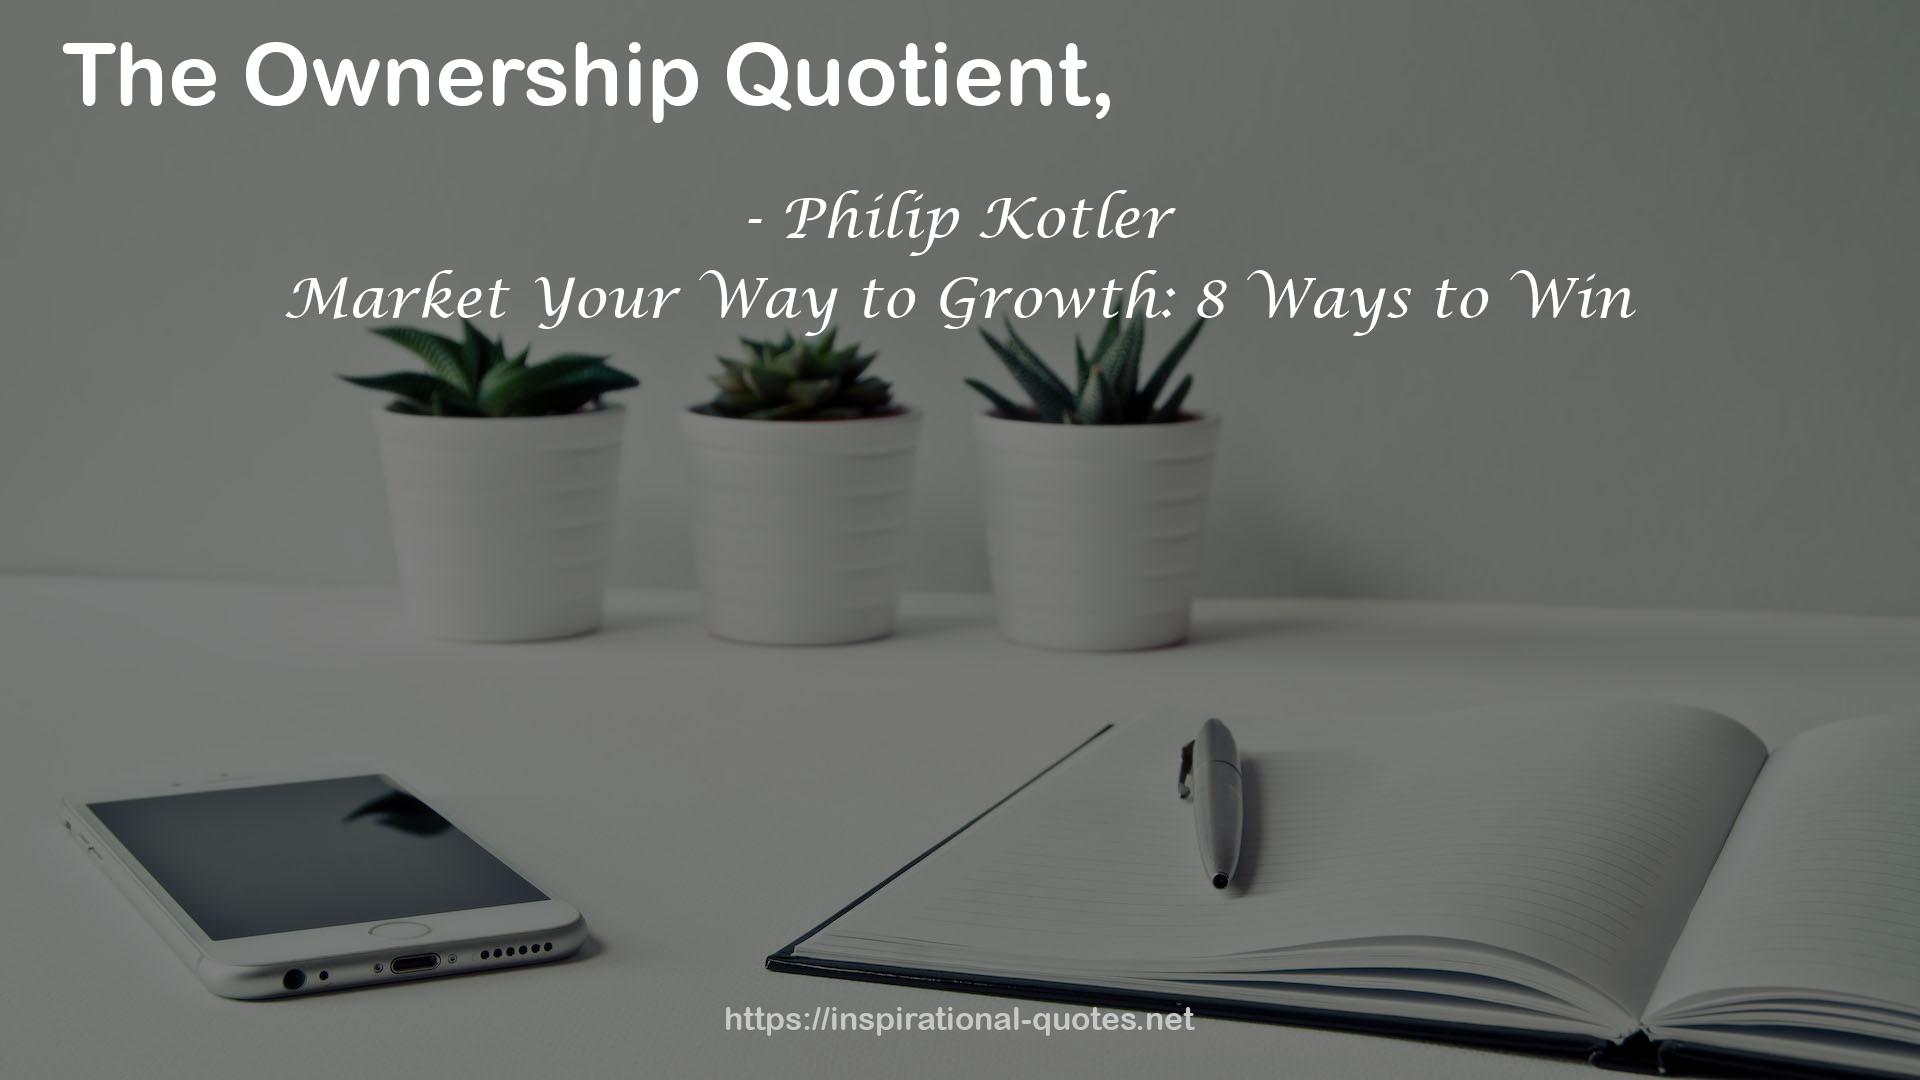 Market Your Way to Growth: 8 Ways to Win QUOTES